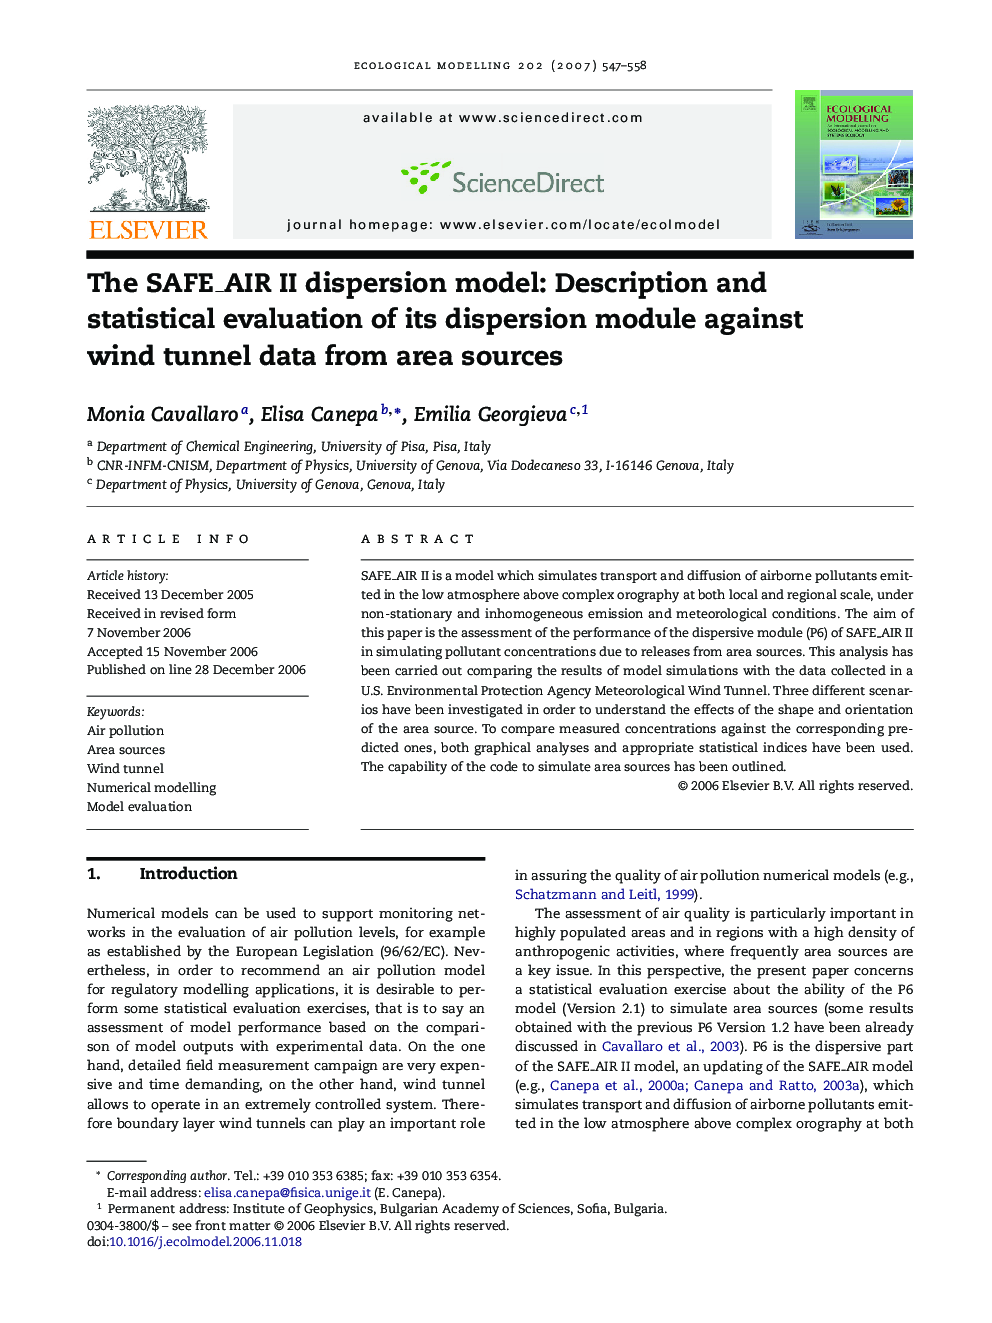 The SAFE_AIR II dispersion model: Description and statistical evaluation of its dispersion module against wind tunnel data from area sources